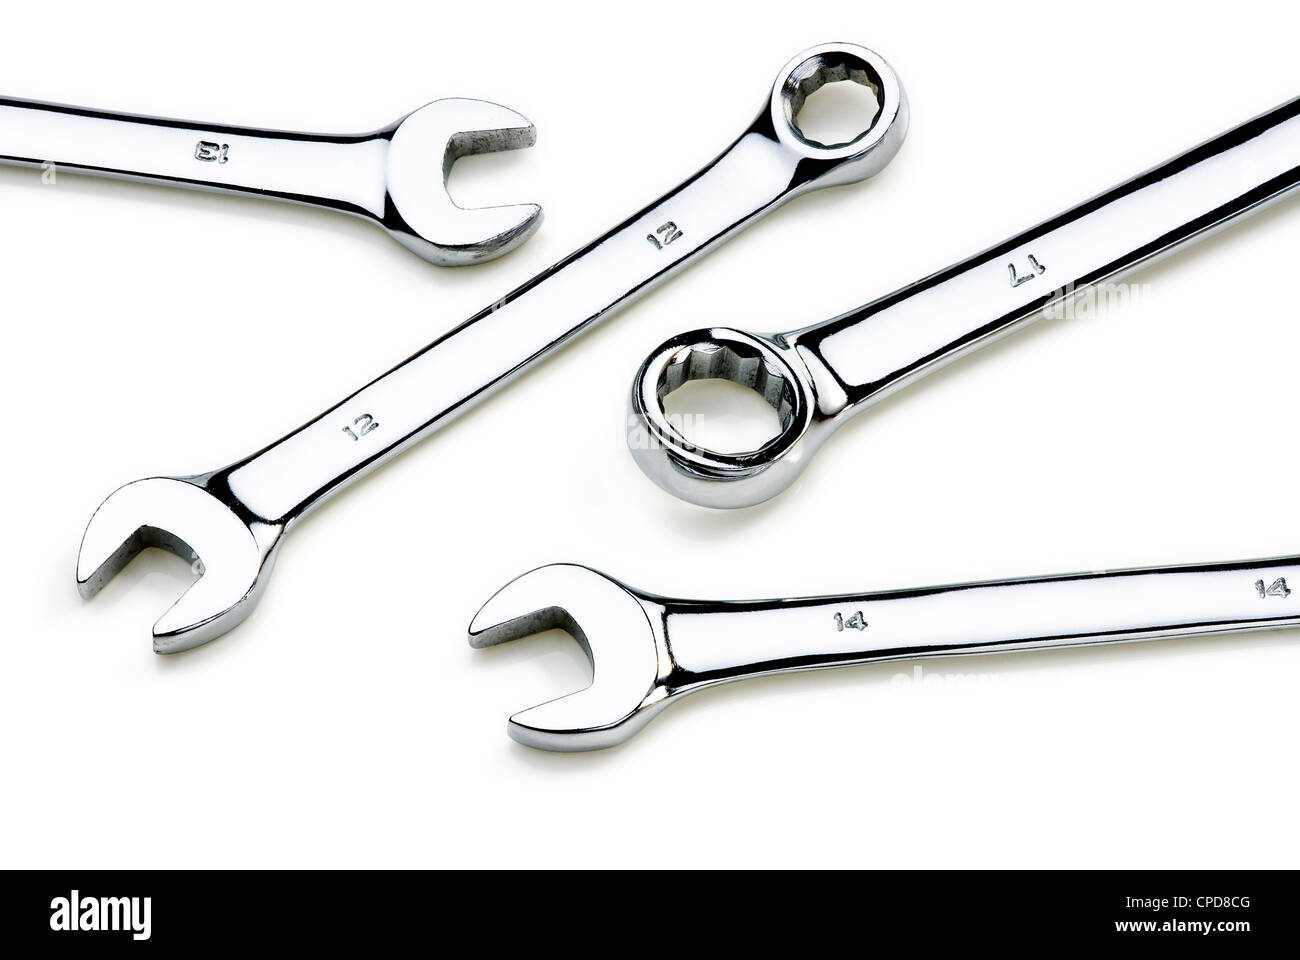 Open ended and ring spanners on a white background. Stock Photo